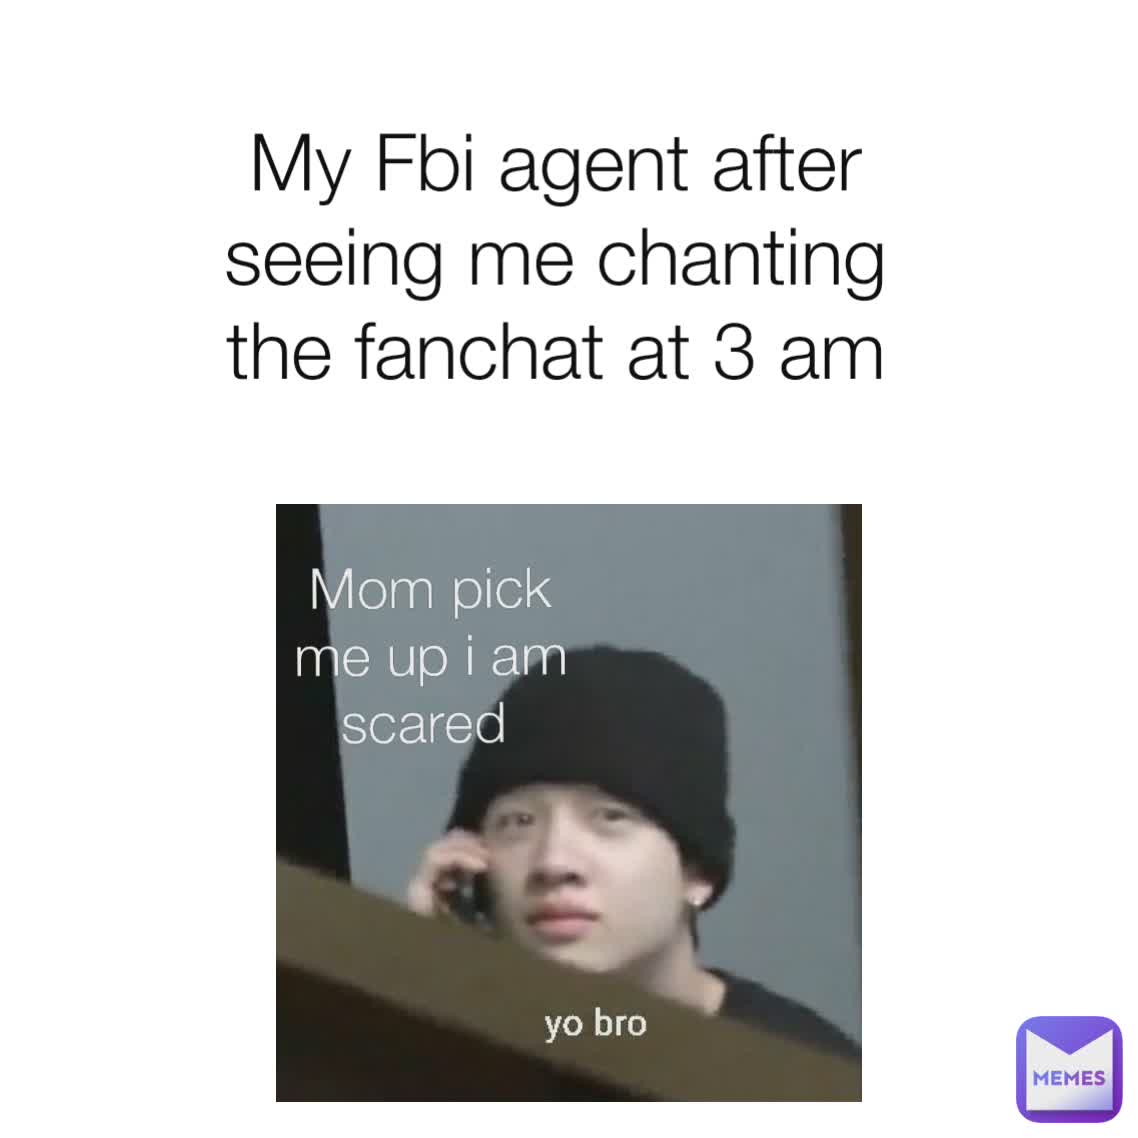 My Fbi agent after seeing me chanting the fanchat at 3 am Mom pick me up i am scared 